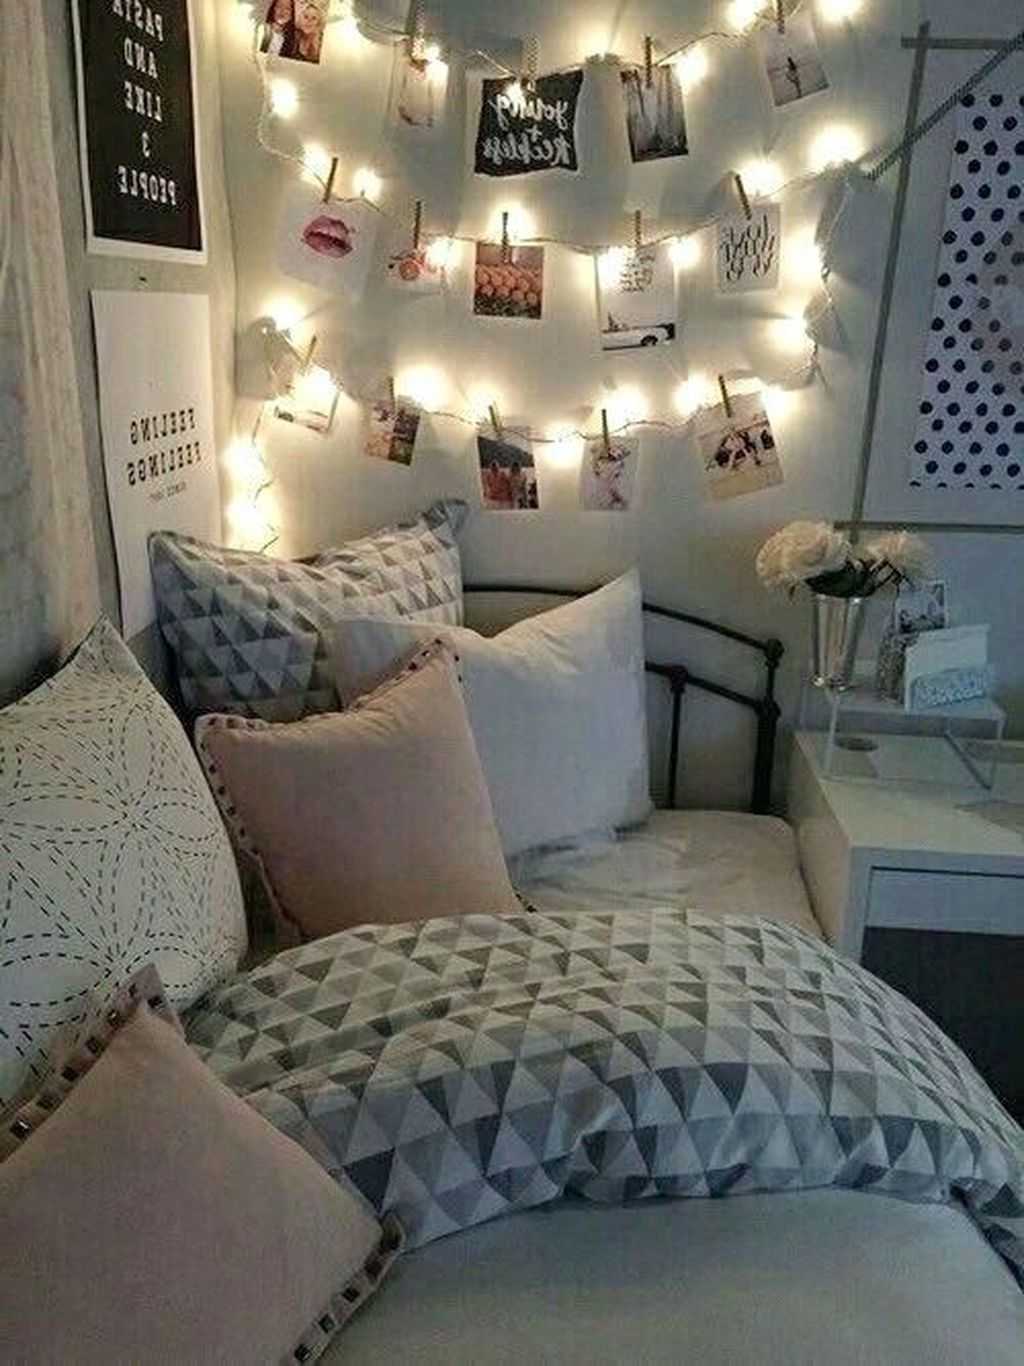 Stunning Teens Bedrooms Design Ideas For Small Spaces To Try 06